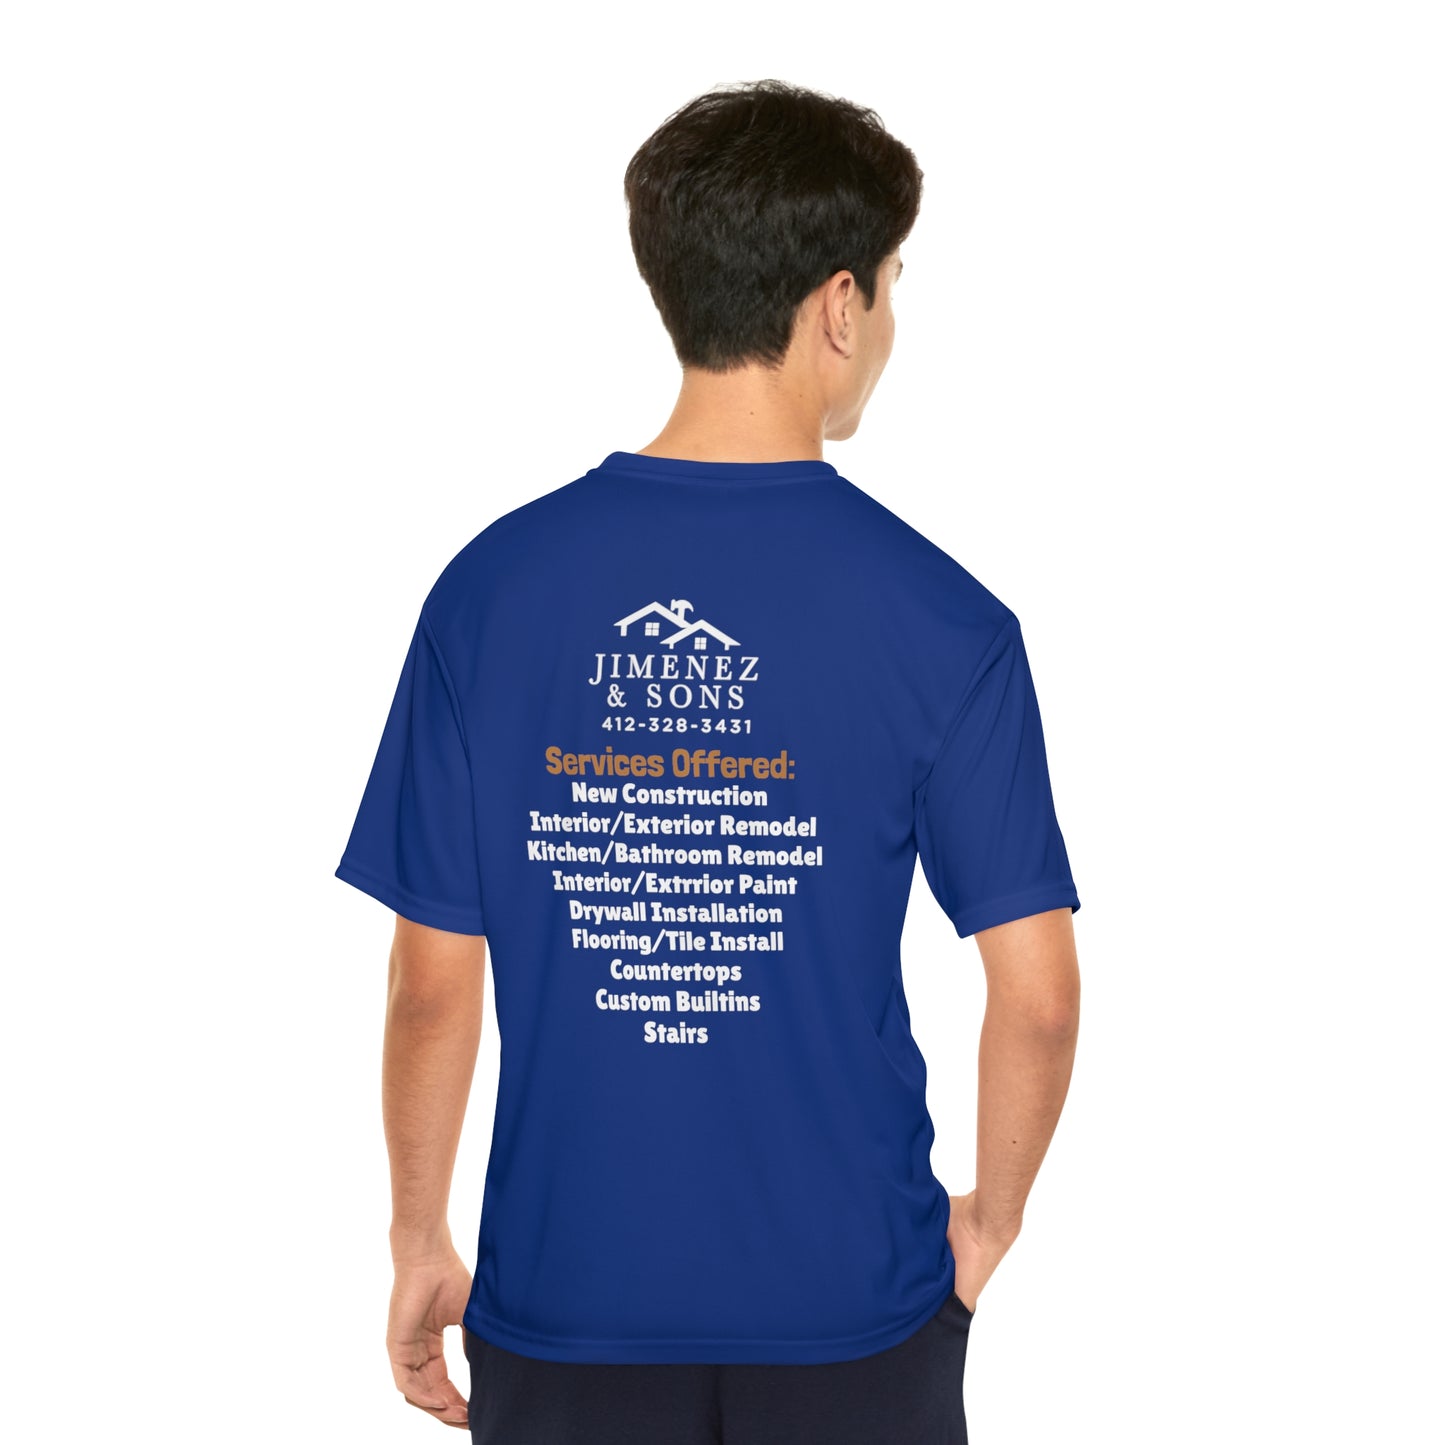 Jimenez and Sons Performance T-Shirt Color